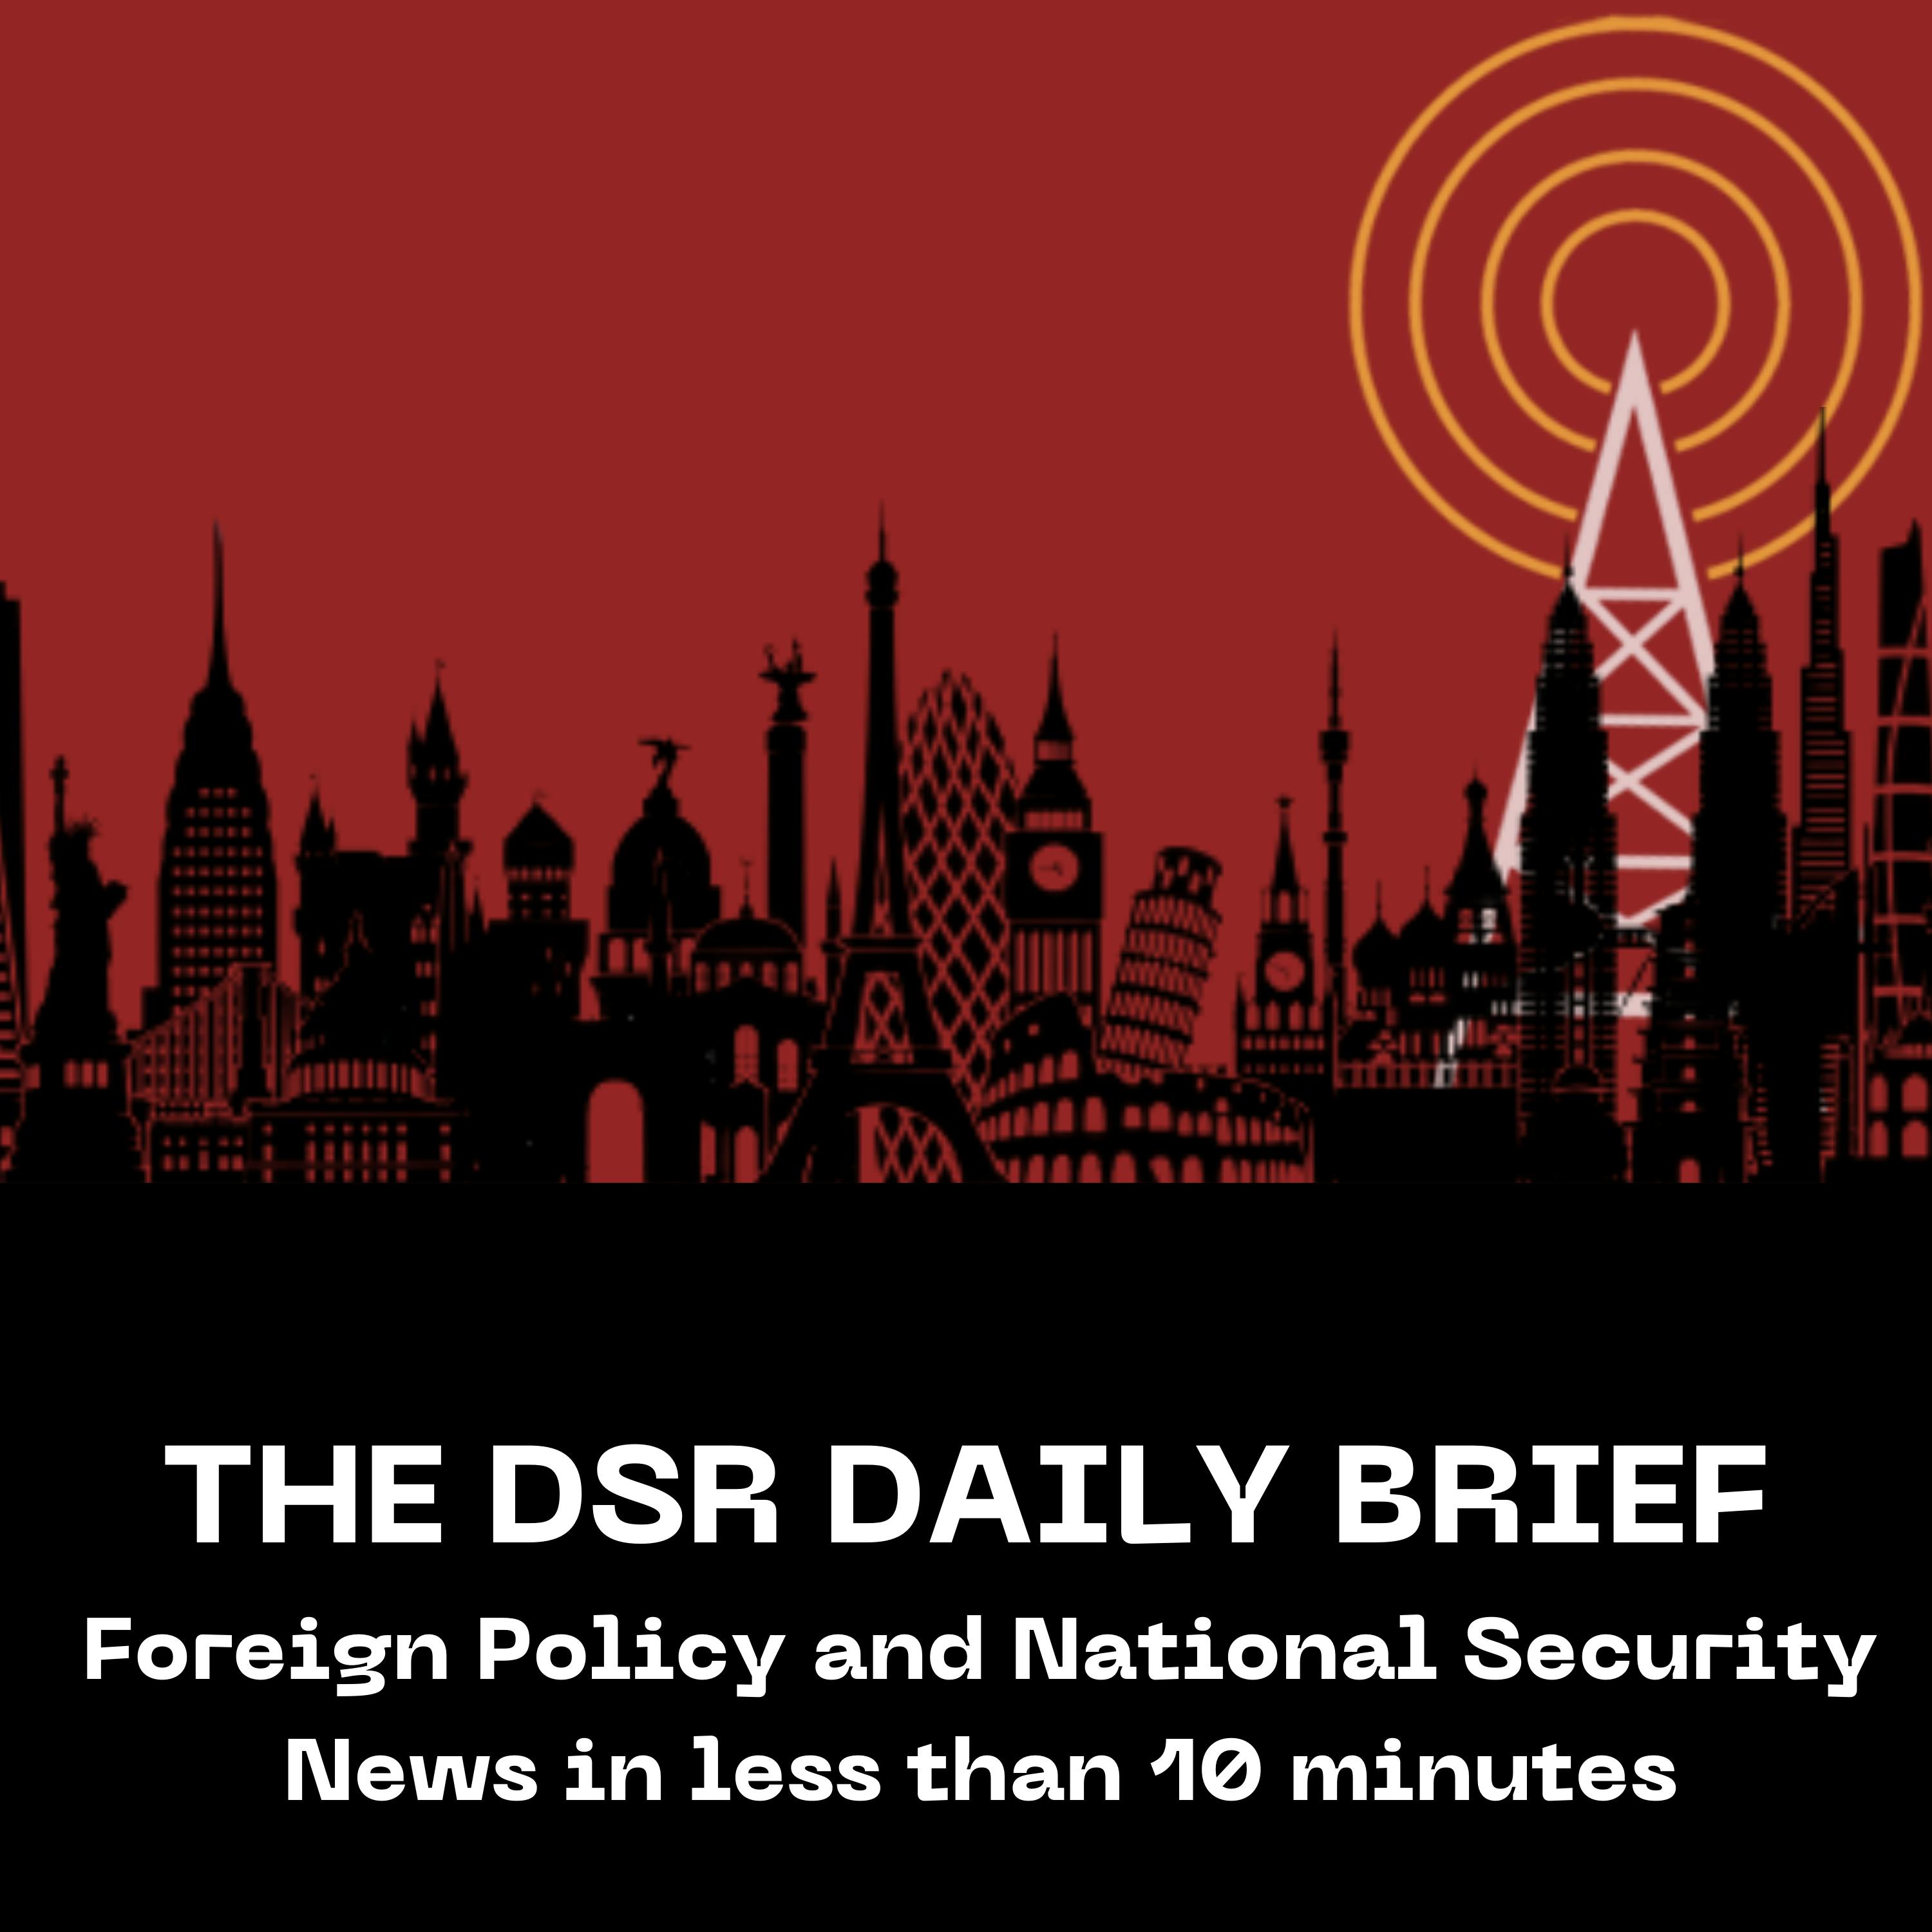 The DSR Daily for November 27: Three Palestinian Students Shot in Vermont, Debates Over Elections in Ukraine